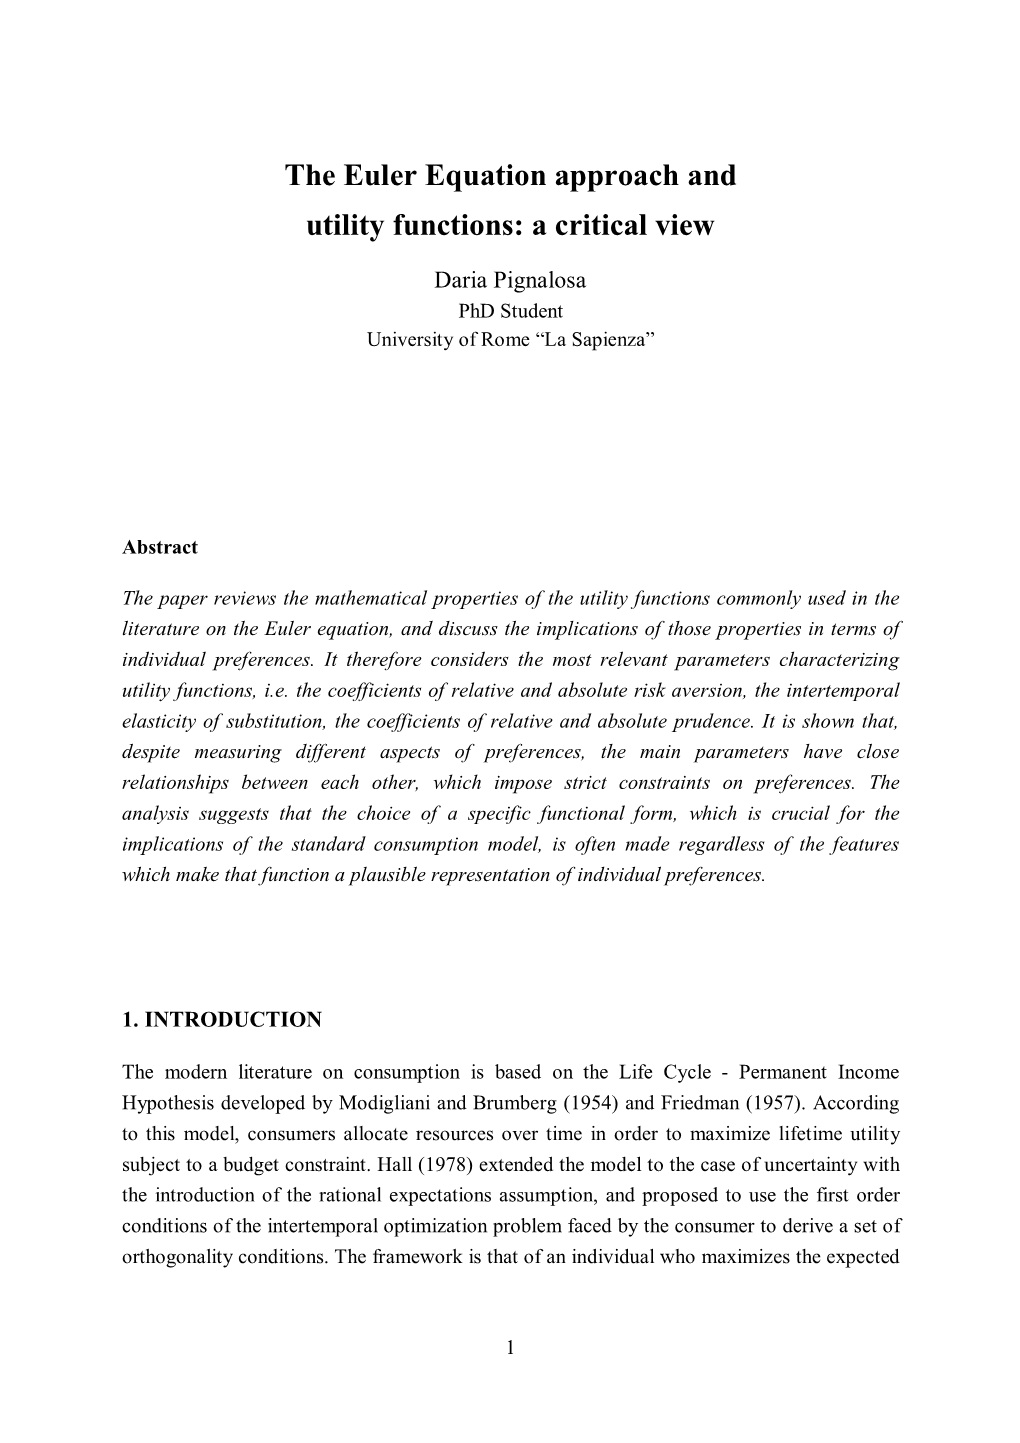 The Euler Equation Approach and Utility Functions: a Critical View